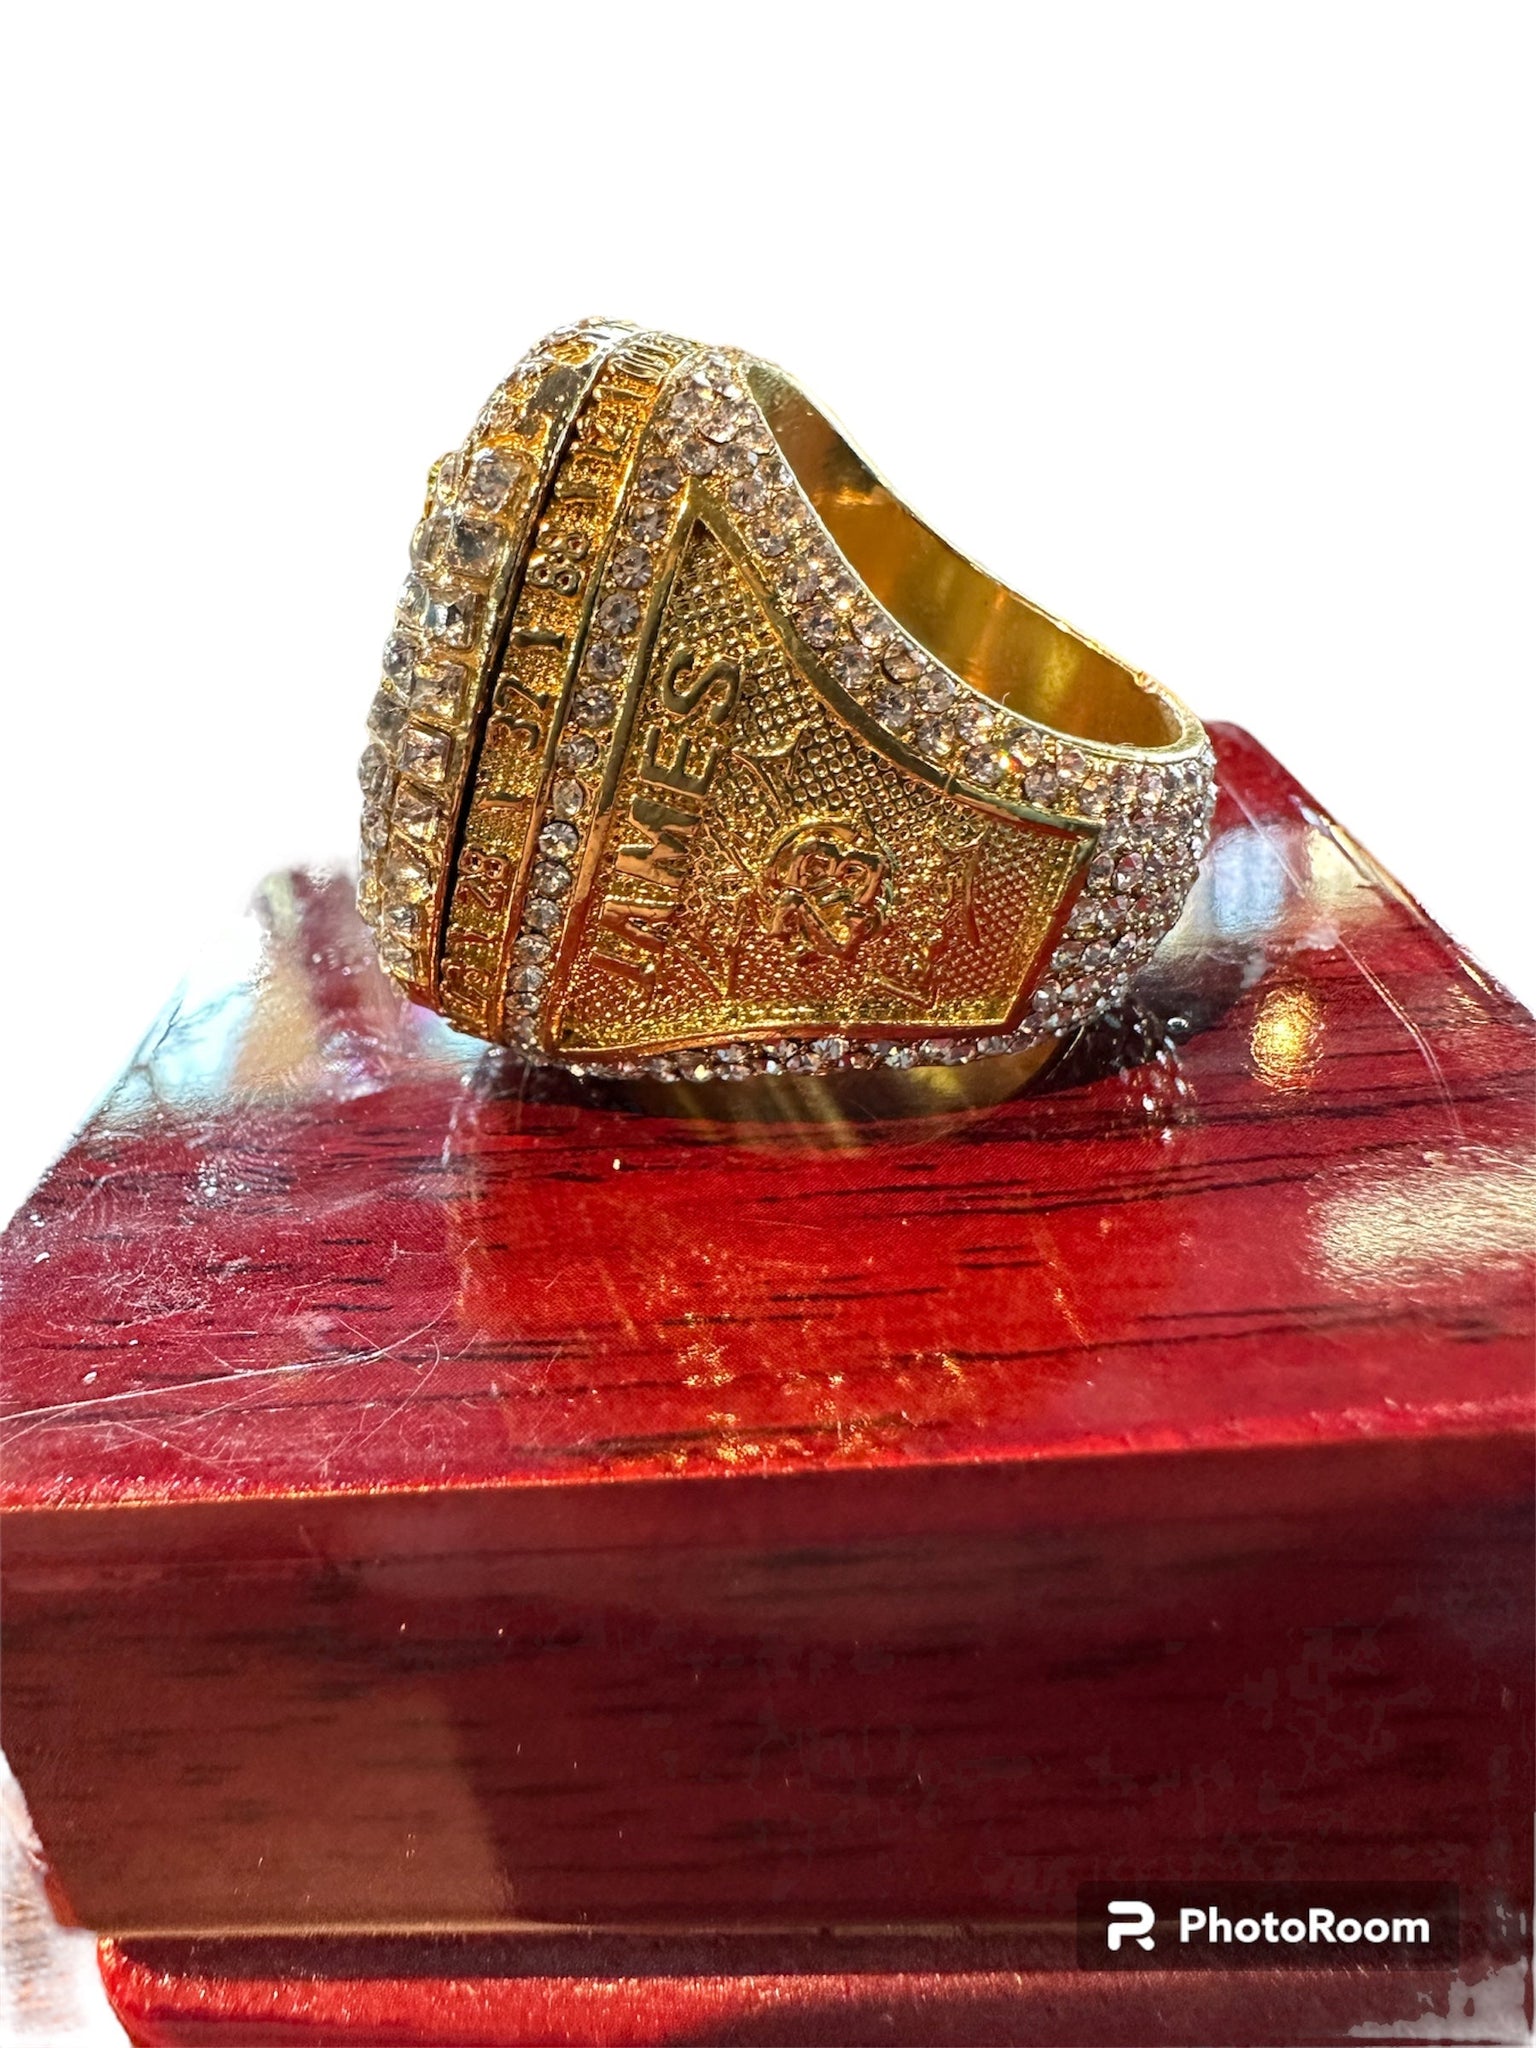 LA LAKERS REPLICA 2020 LEBRON JAMES CHAMPIONSHIP RING WITH LARRY